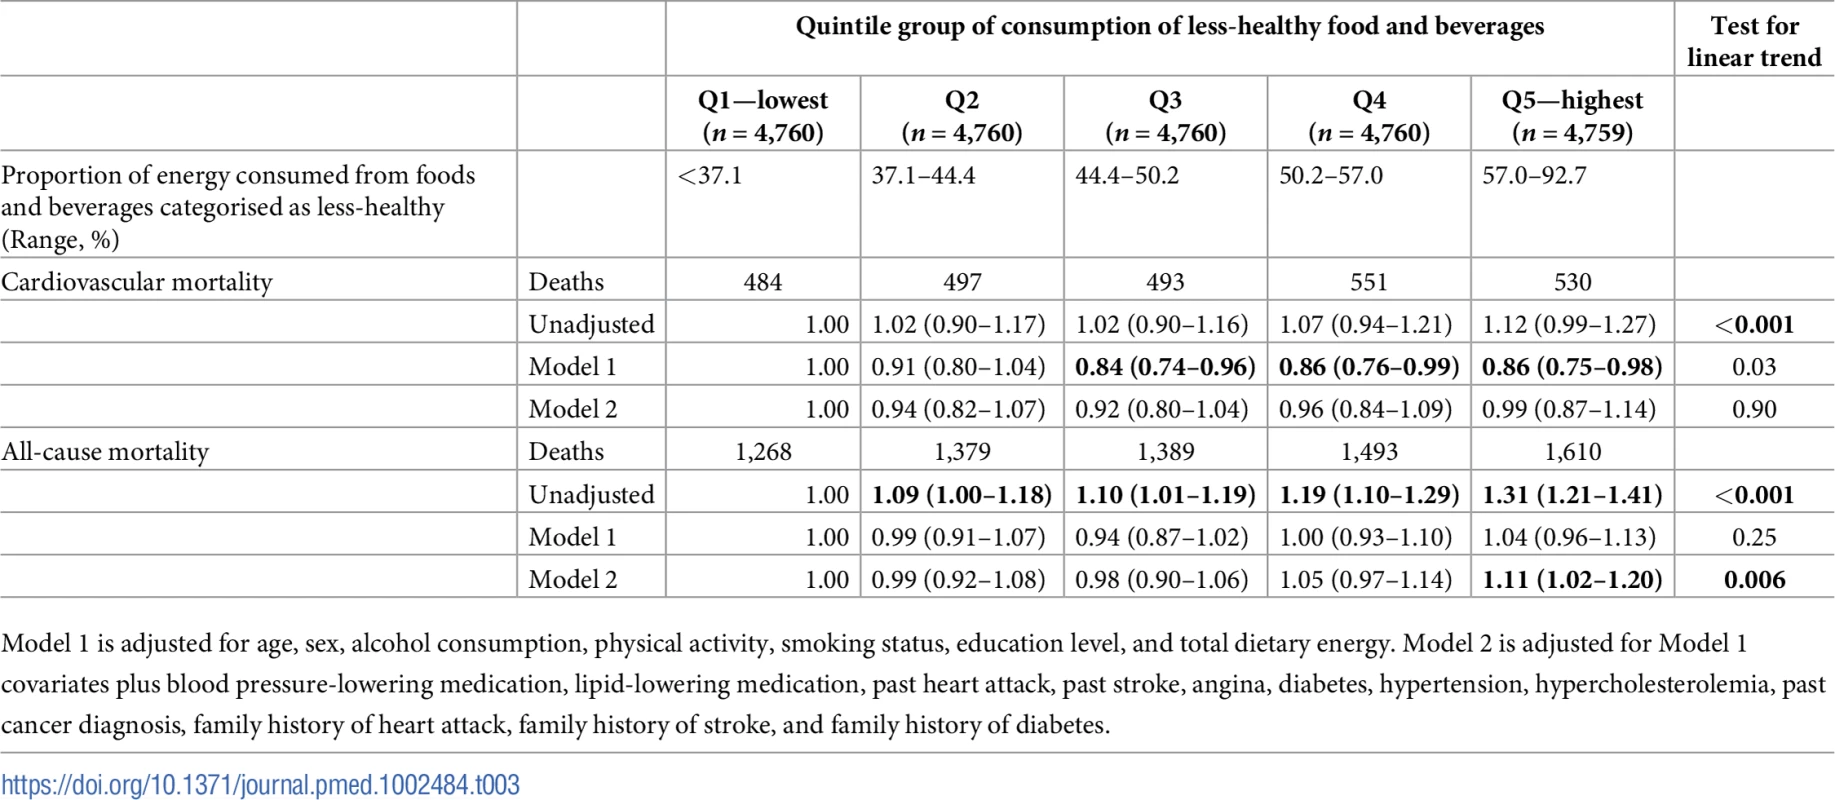 Hazard ratios for cardiovascular and all-cause mortality by quintile group of proportional less-healthy food consumption in the European Prospective Investigation of Cancer (EPIC)-Norfolk (<i>n</i> = 24,880).